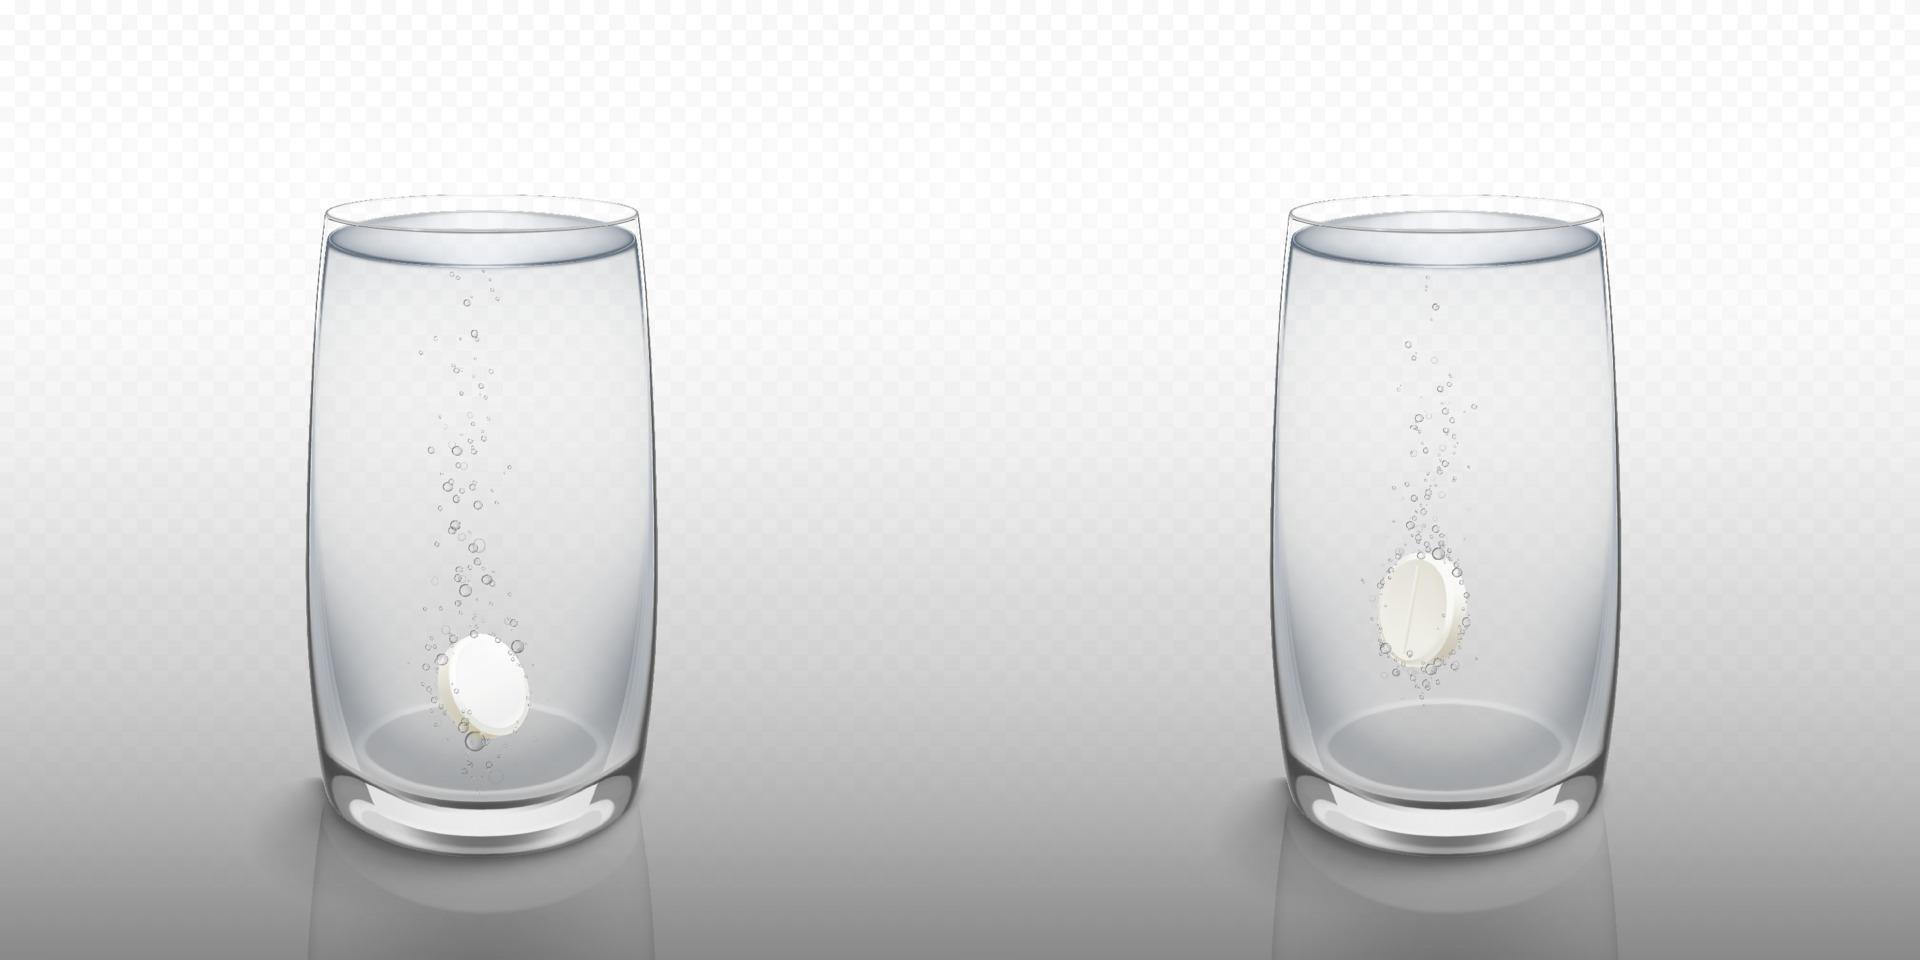 Effervescent soluble tablet in water glass vector